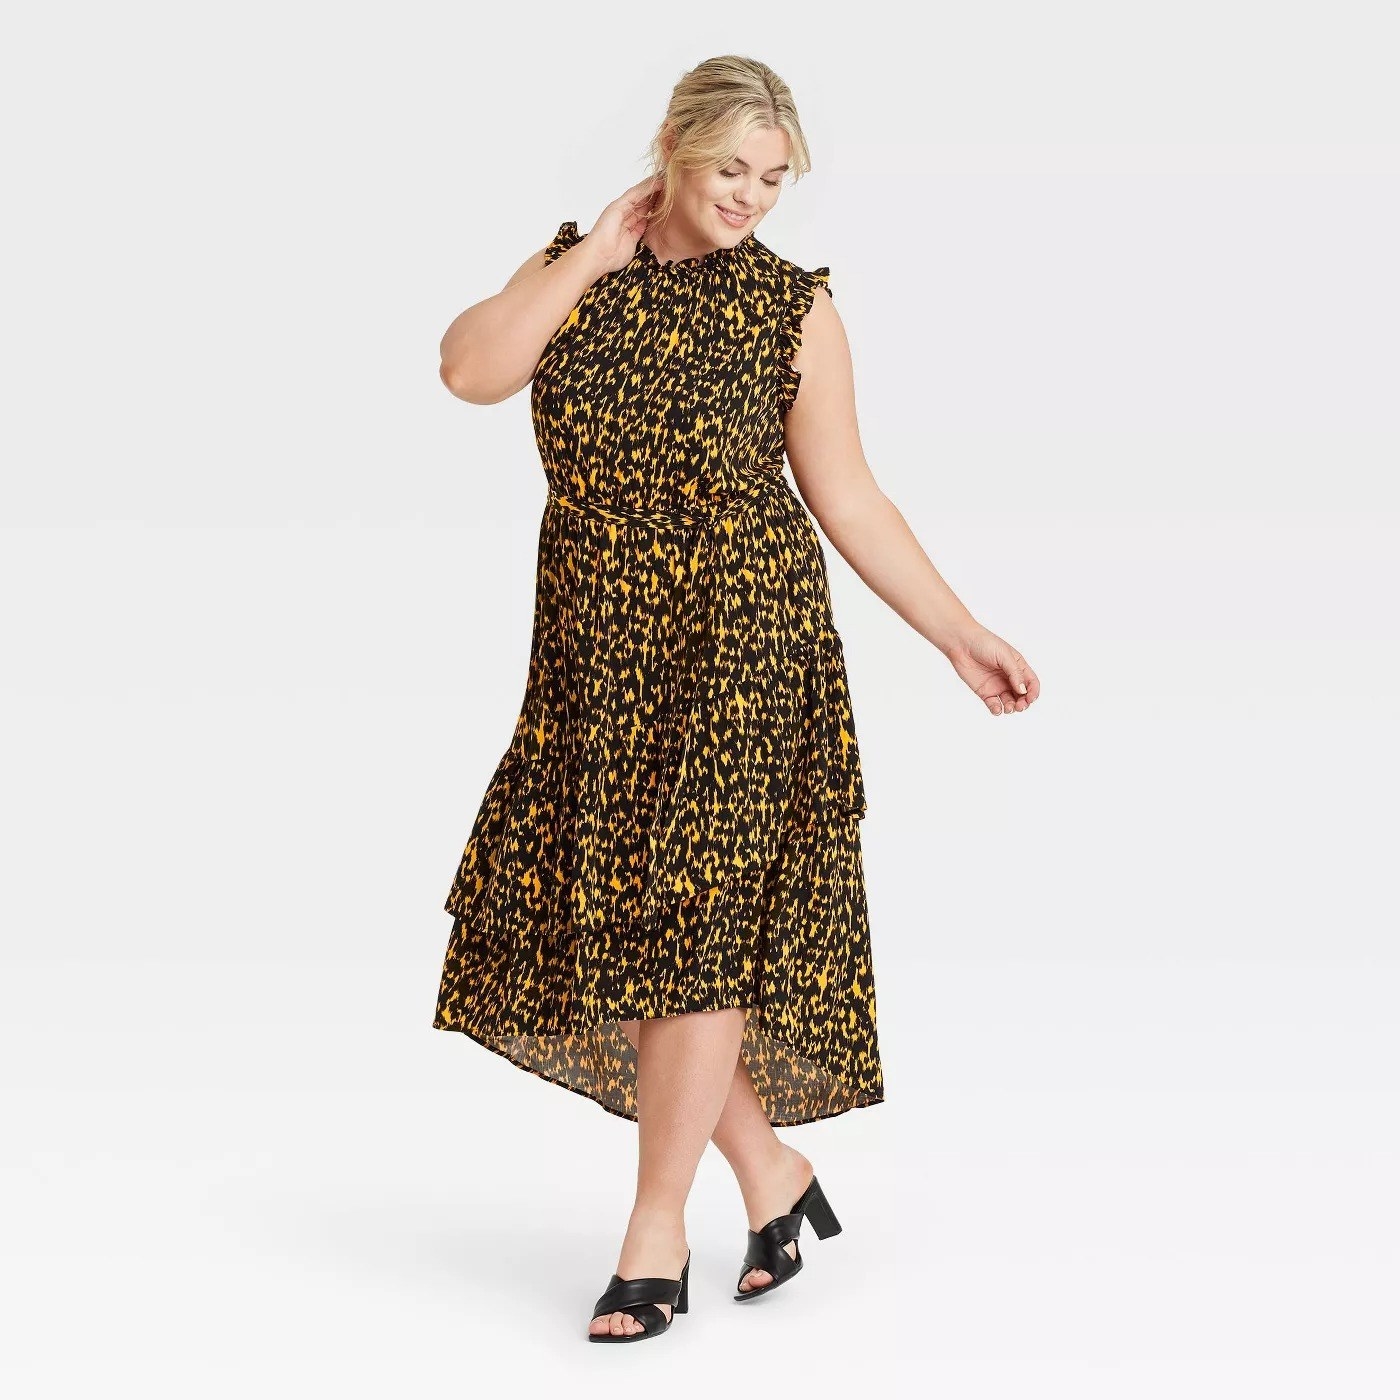 Model wearing black and yellow patterned dress, goes past the knee